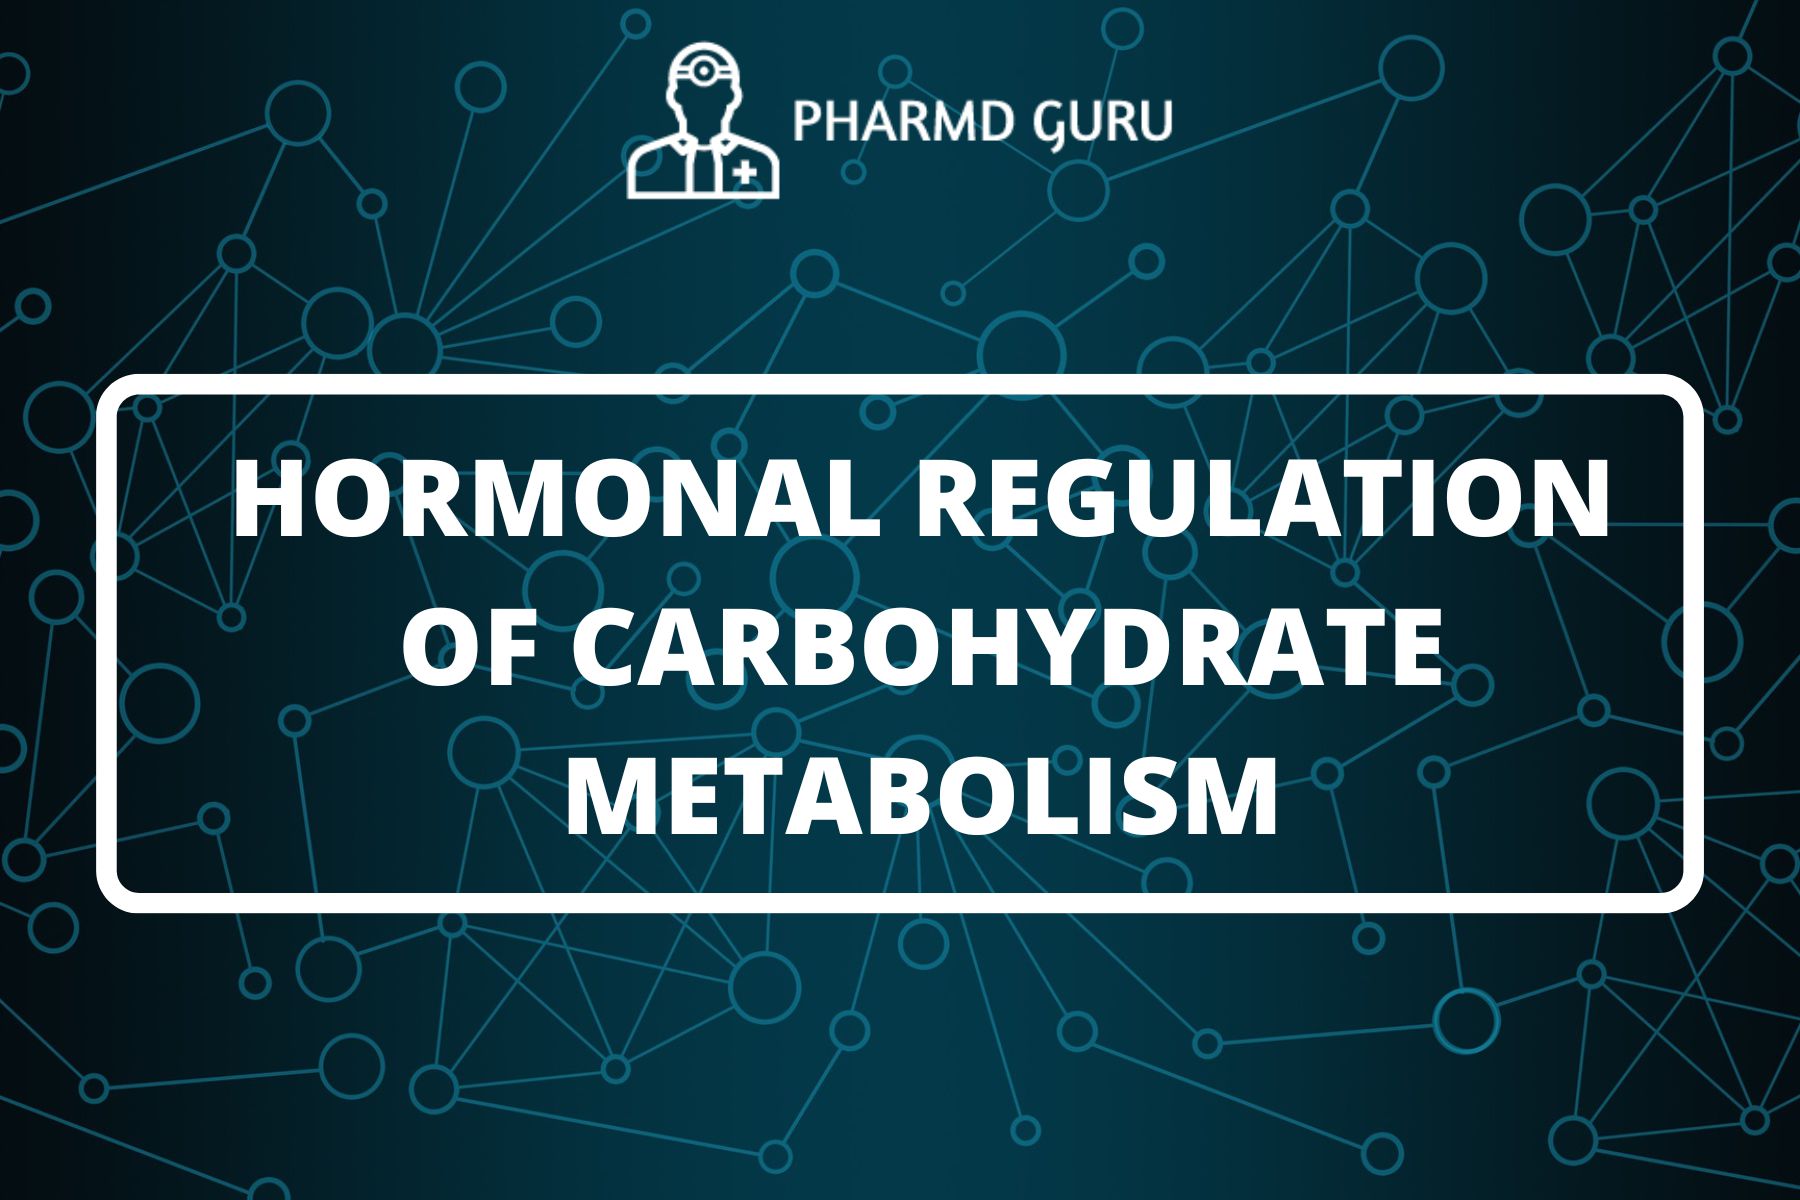 Carbohydrates and Hormone Regulation